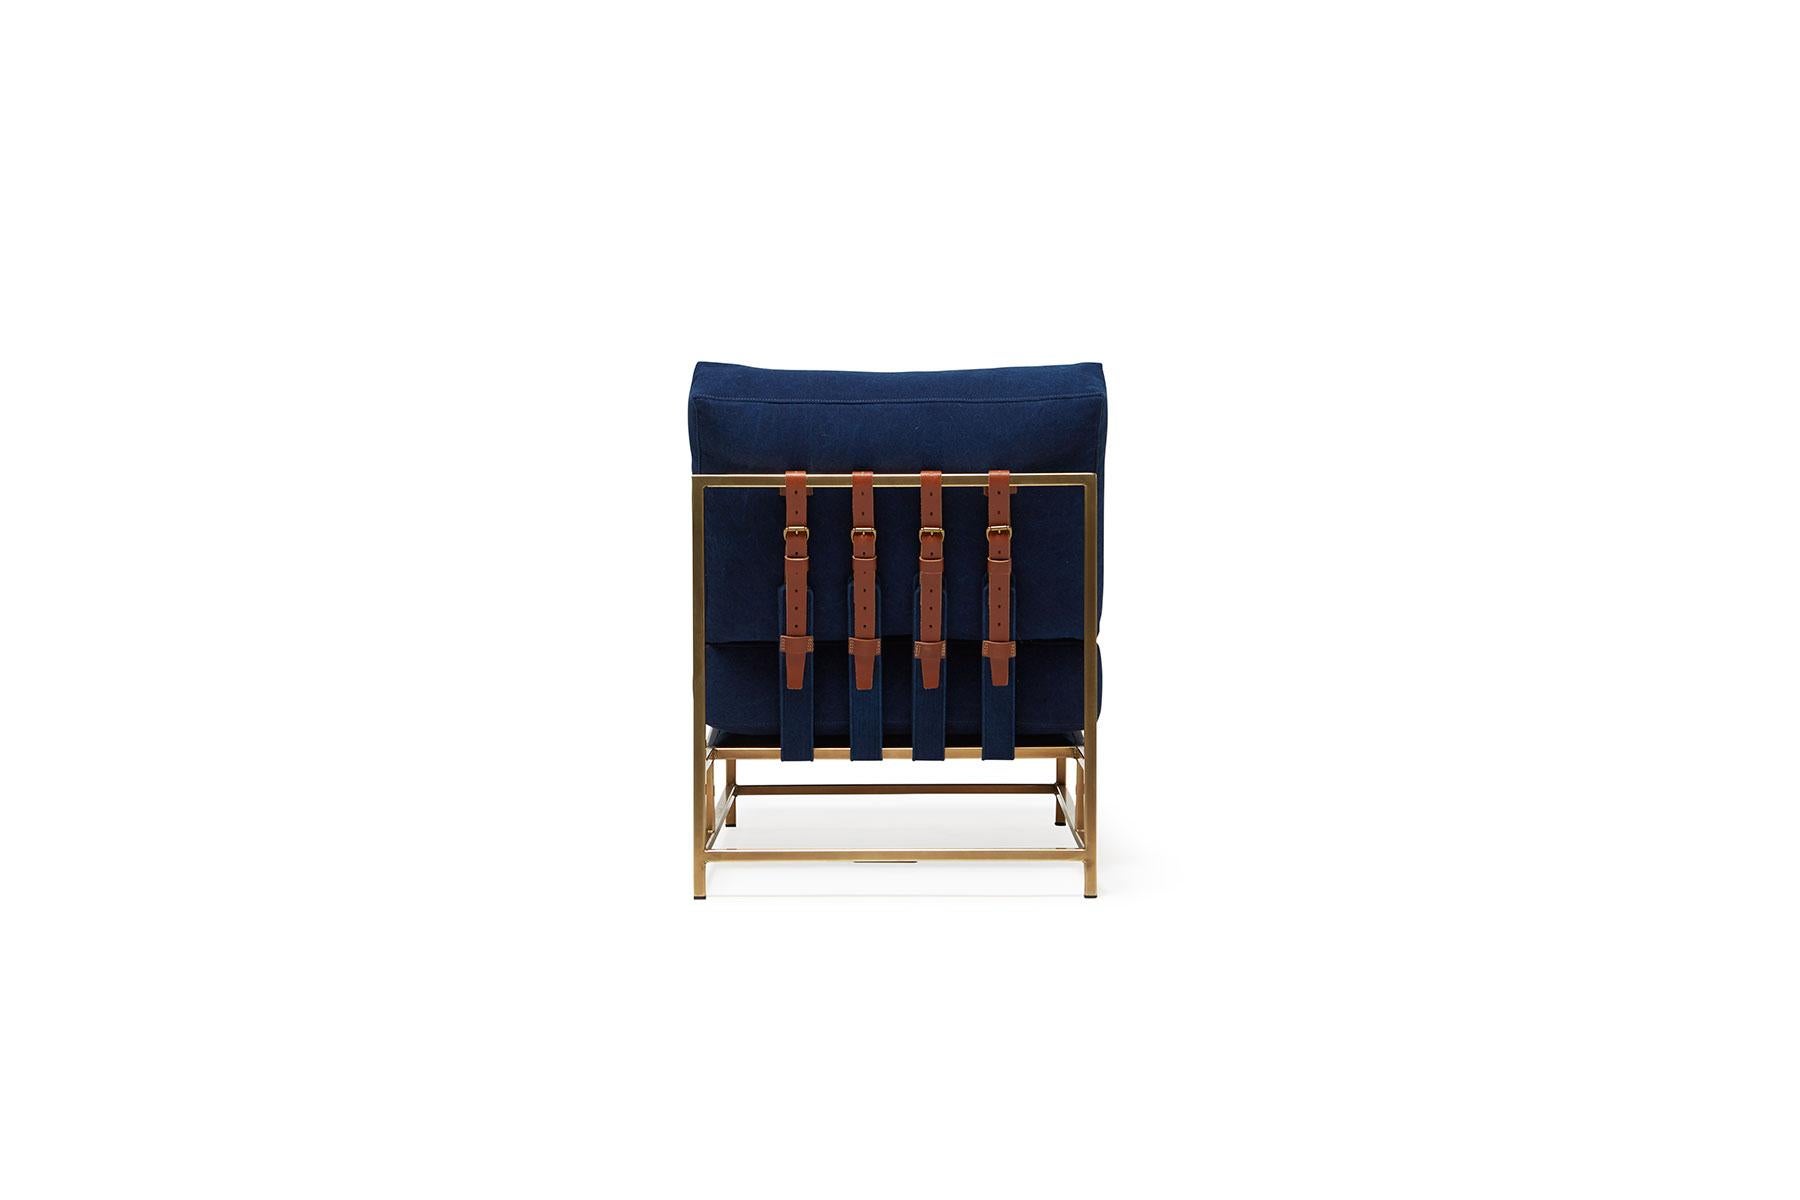 Metalwork Hand-Dyed Indigo Canvas & Tarnished Brass Chair For Sale